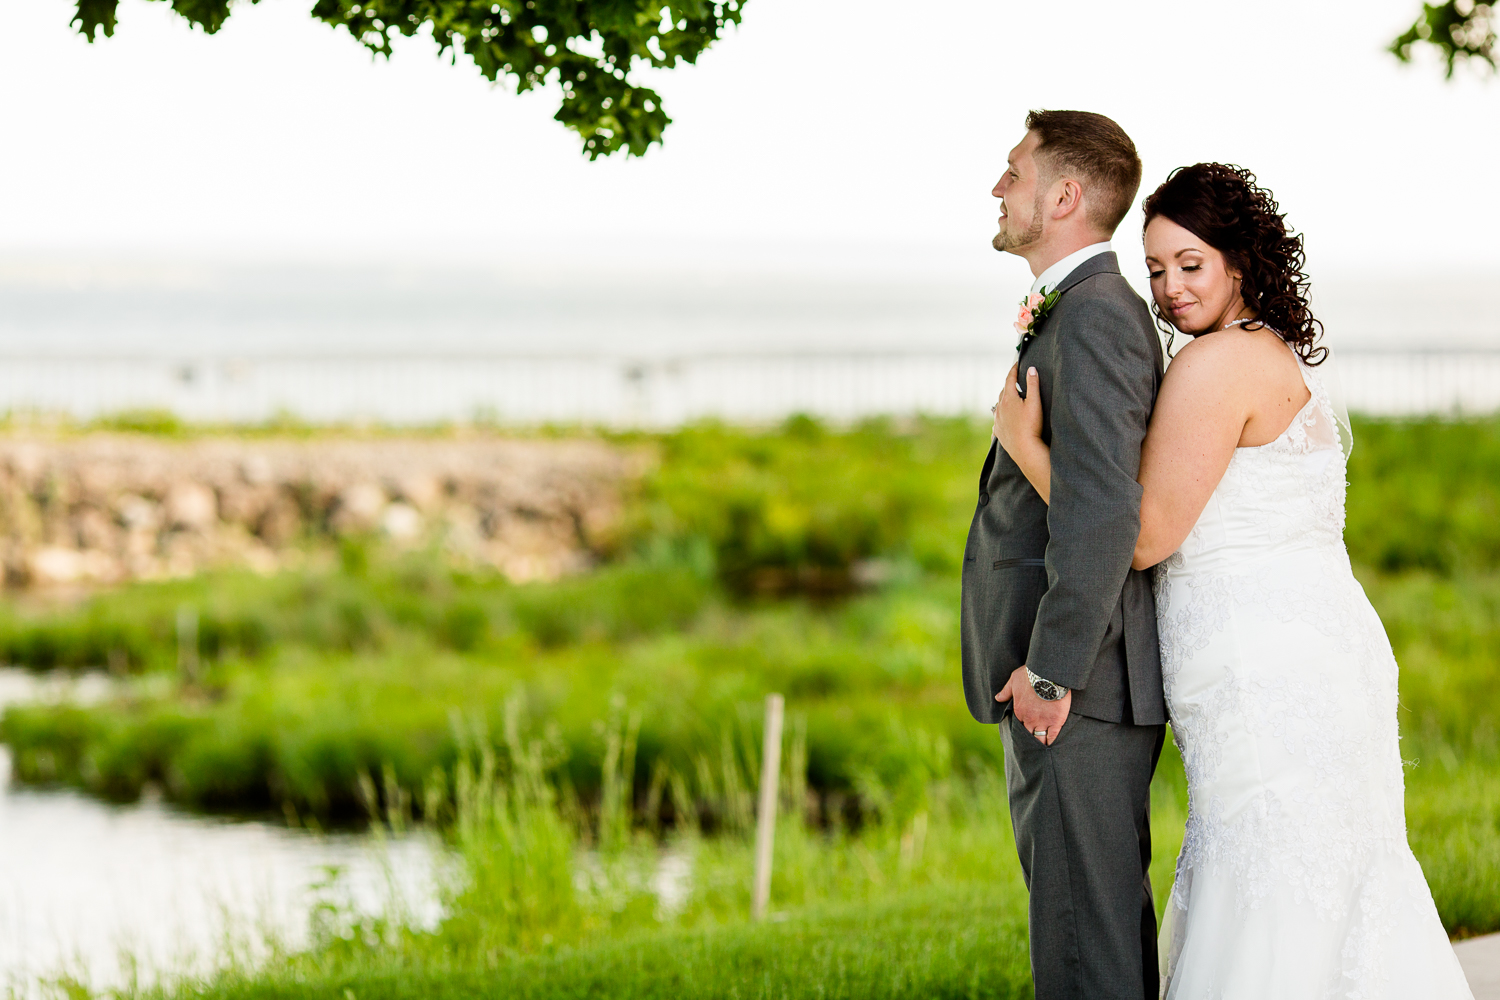  Bride holds groom from behind. Groom looks out into the distance. There is green grass behind them. 